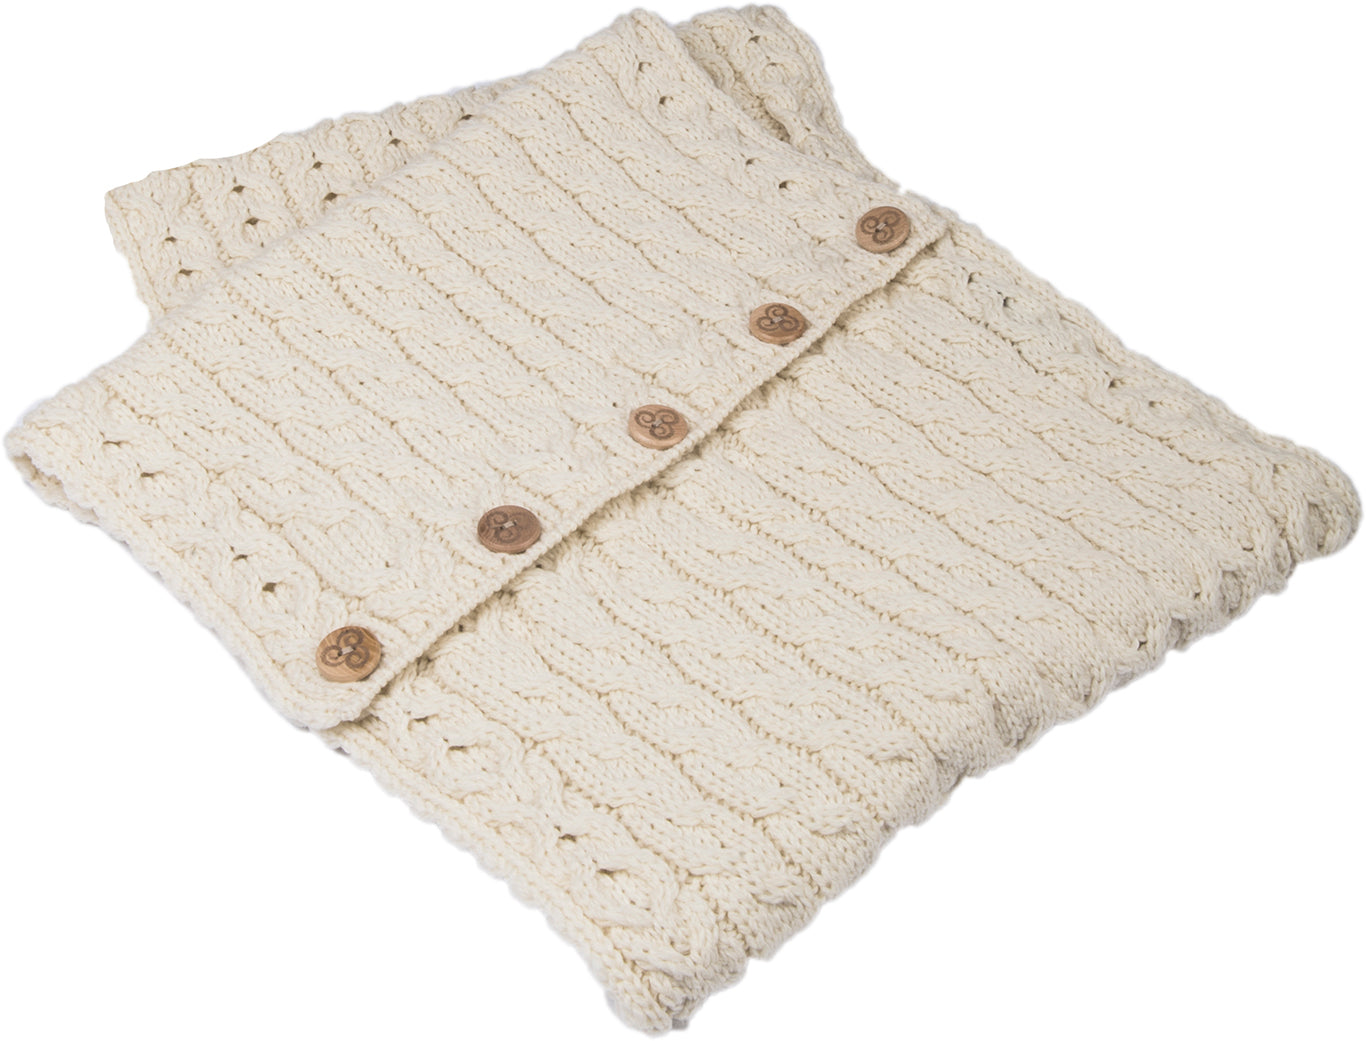 Aran Woollen Mills | Snood Scarf with Buttons | A518-Merino White